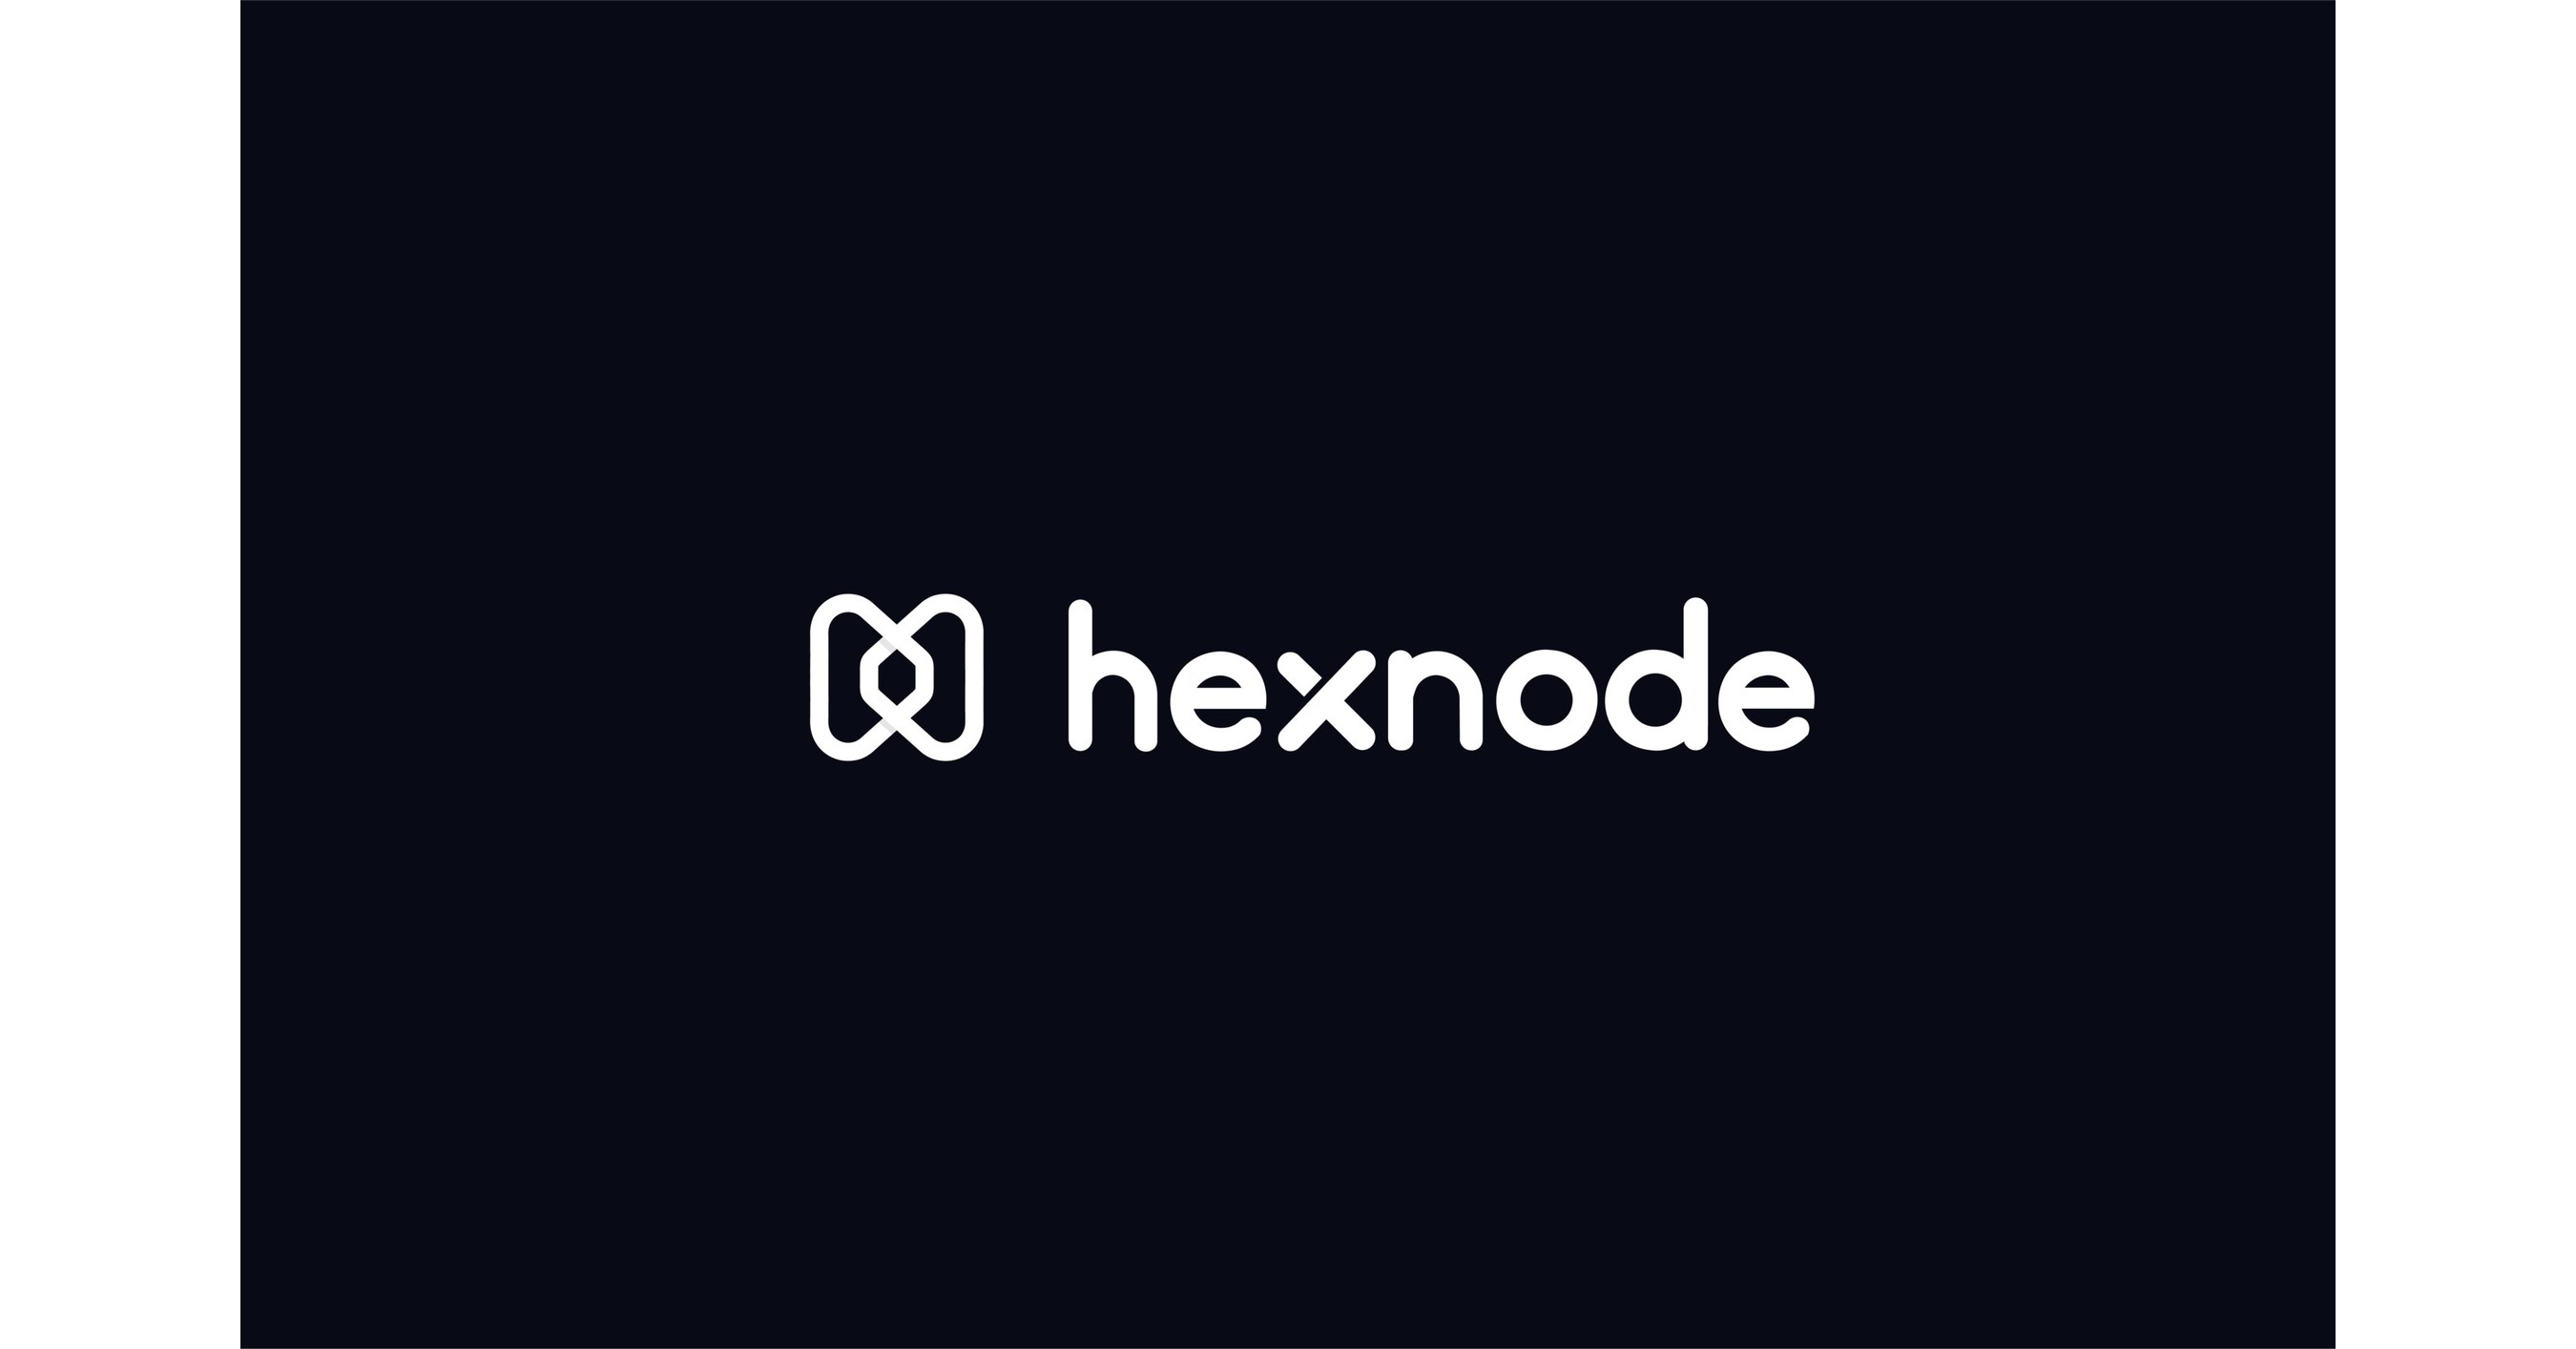 Hexnode is Now a Samsung Knox Validated Partner